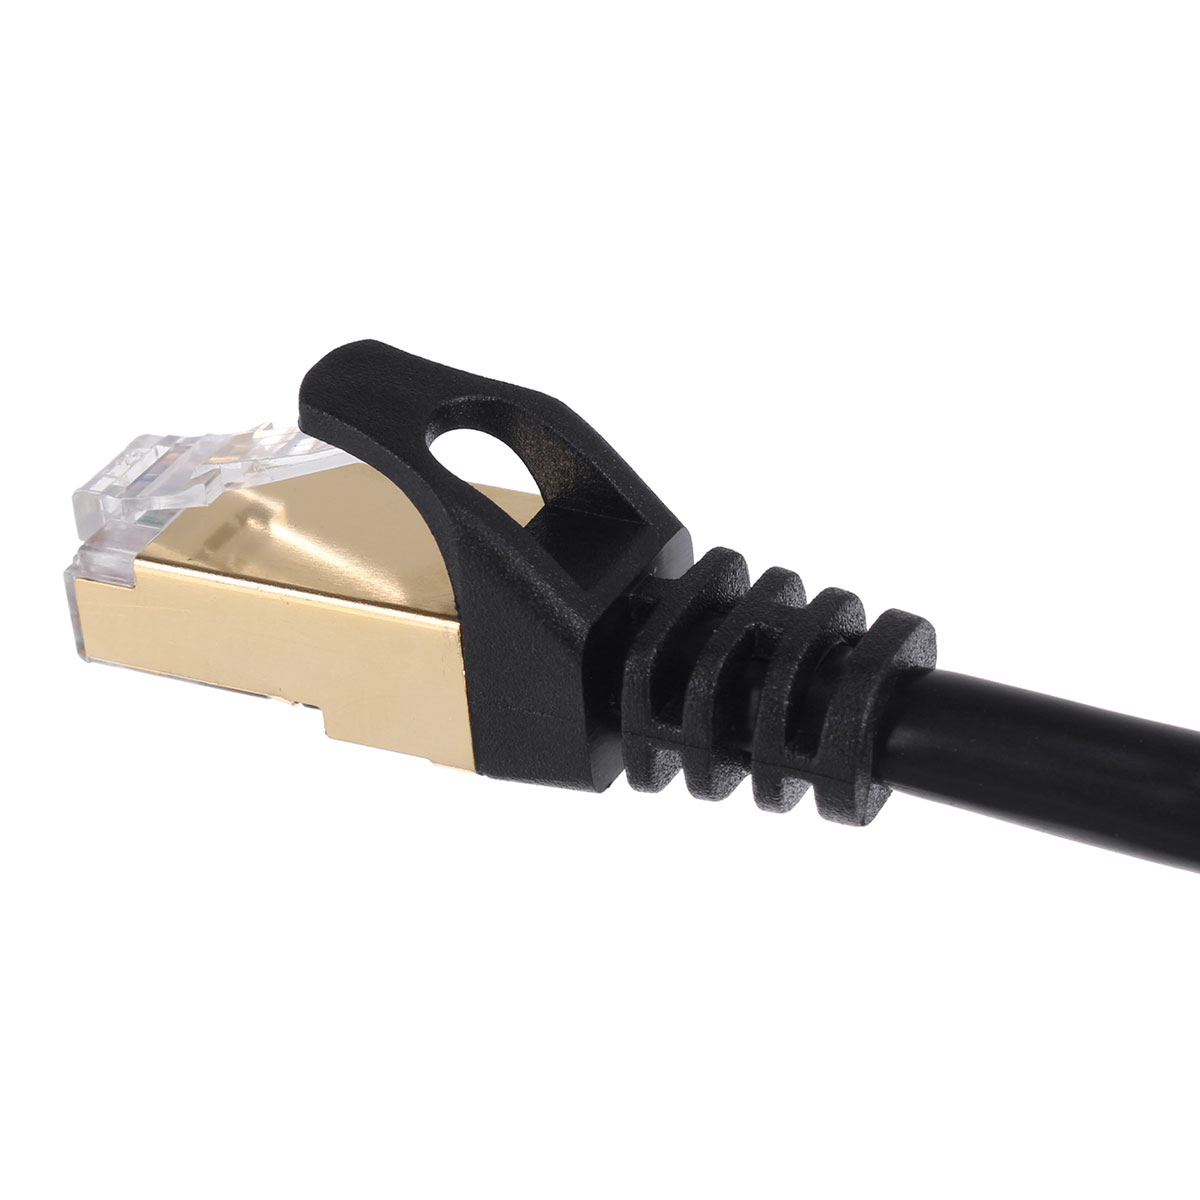 Black-Cat7-28AWG-High-Speed-Pure-Copper-Core-Networking-Cable-Cat7-Cable-LAN-Network-RJ45-Patch-Cord-1621196-7